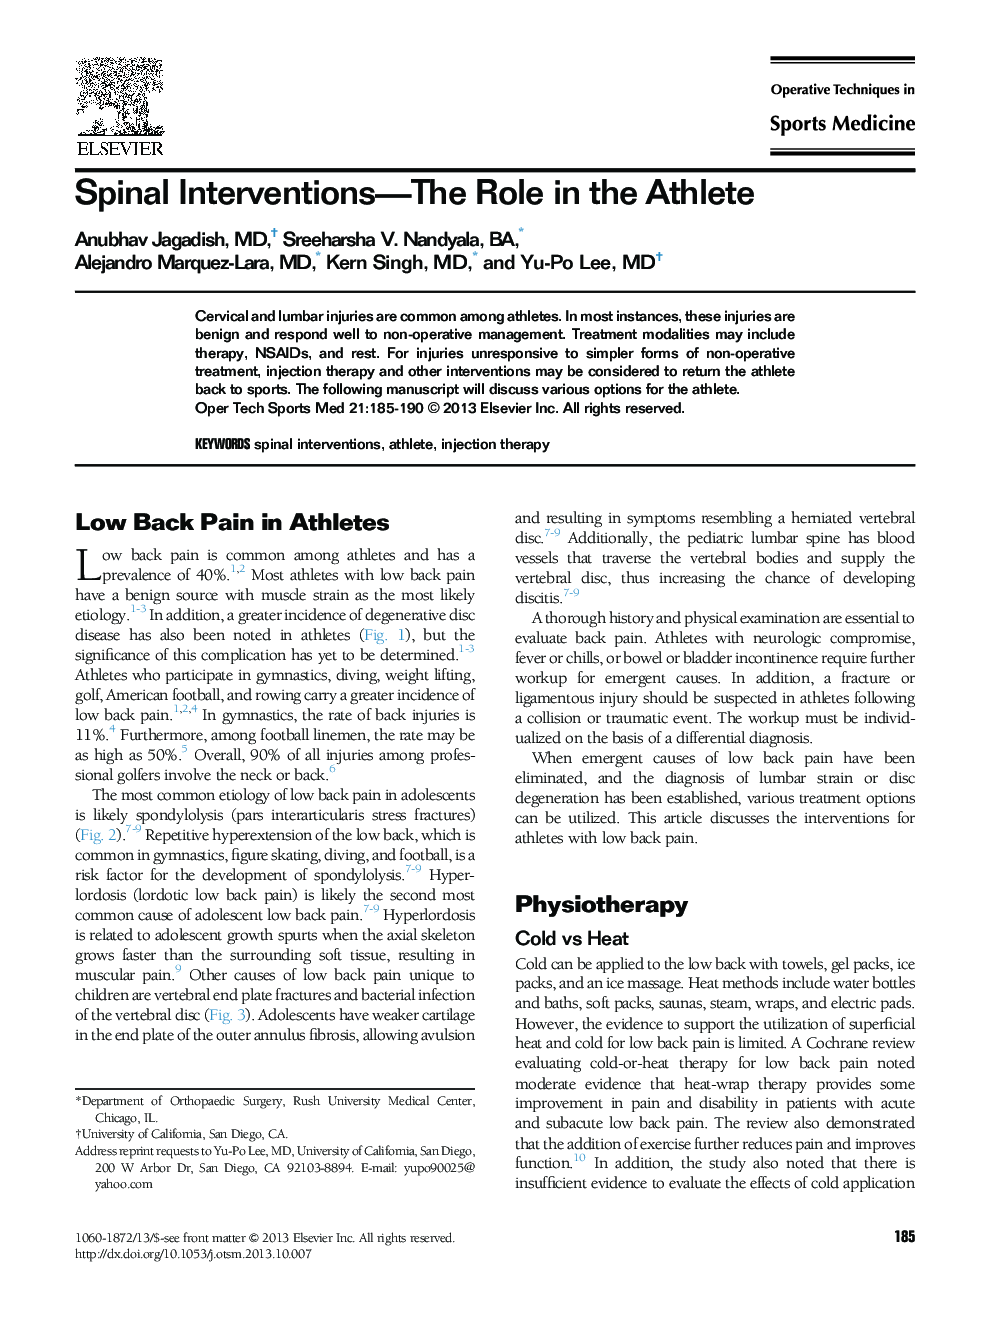 Spinal Interventions—The Role in the Athlete